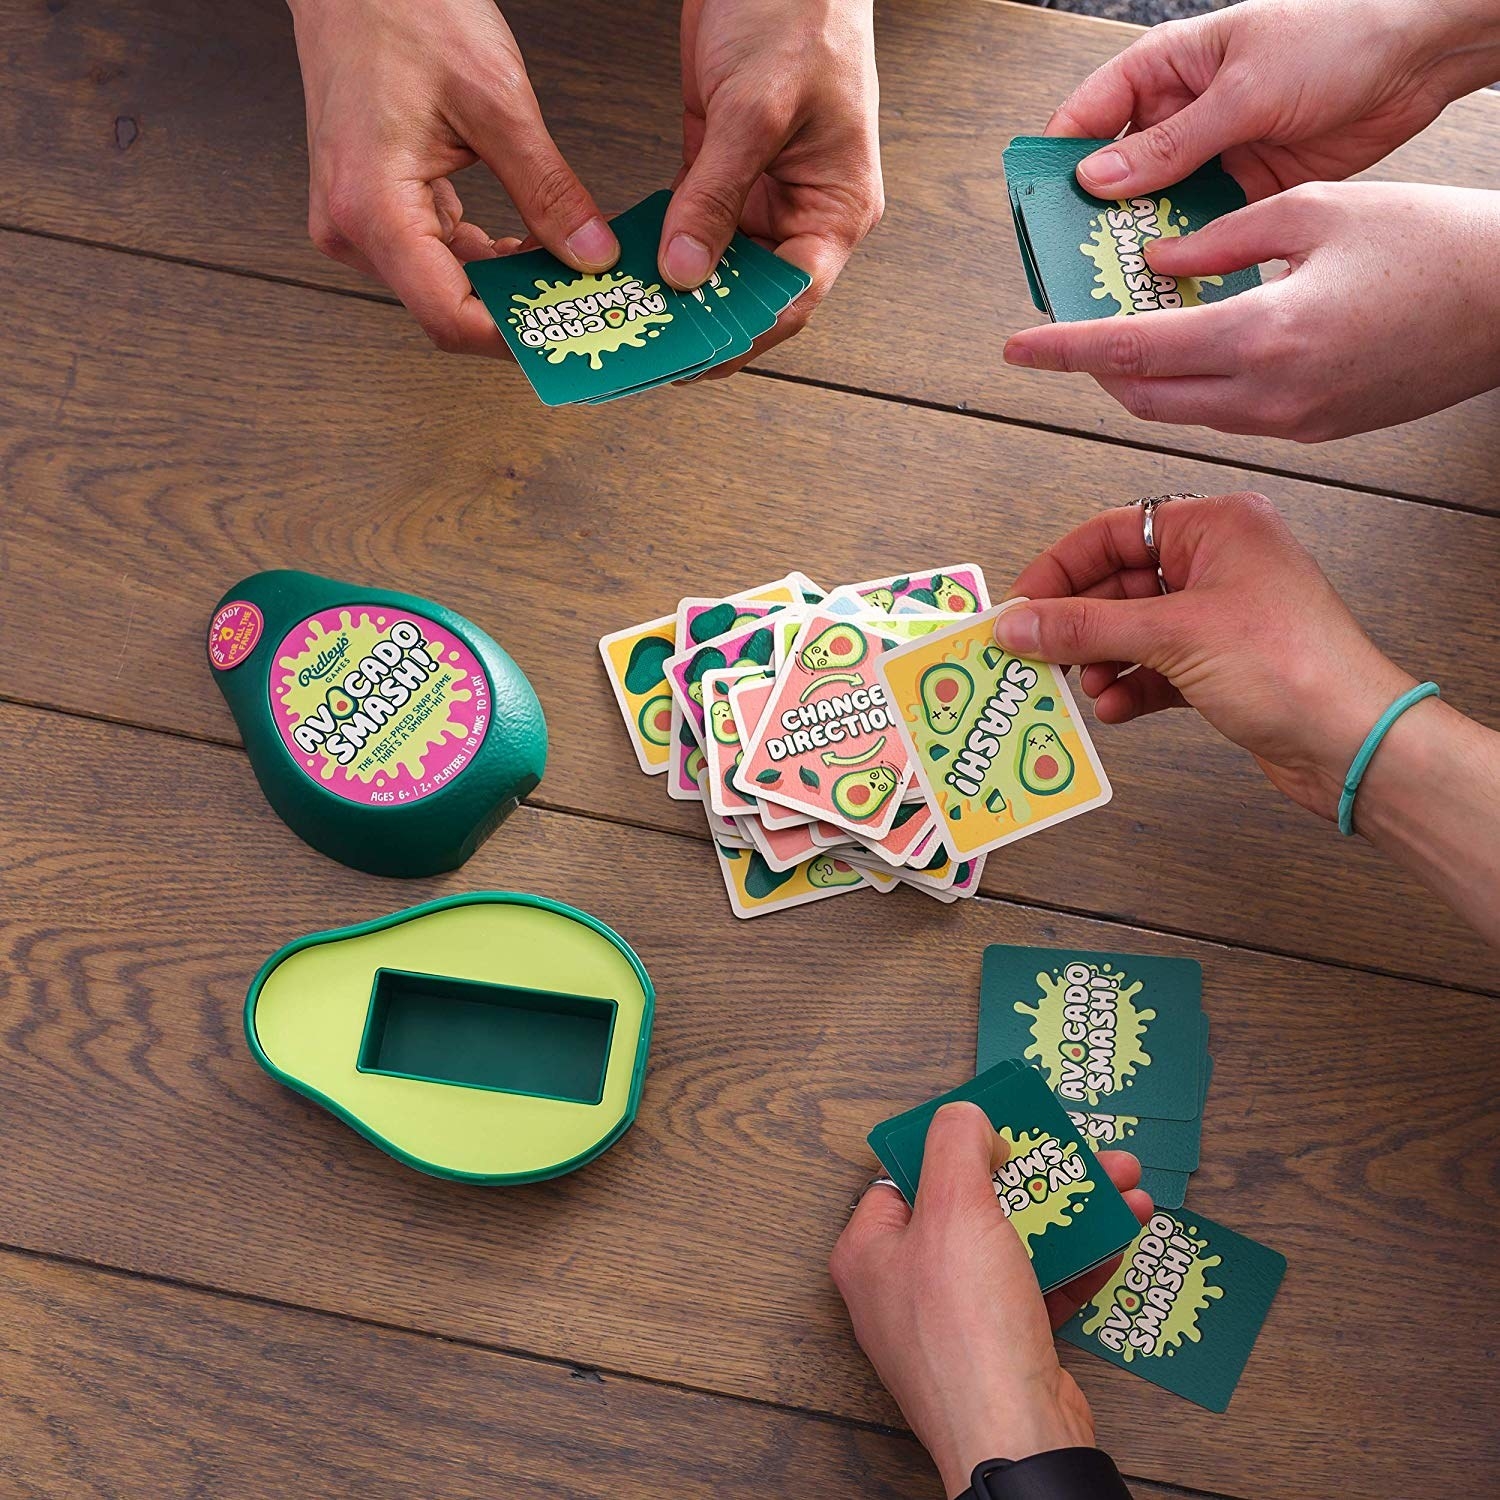 the card game with a matching avocado shaped box